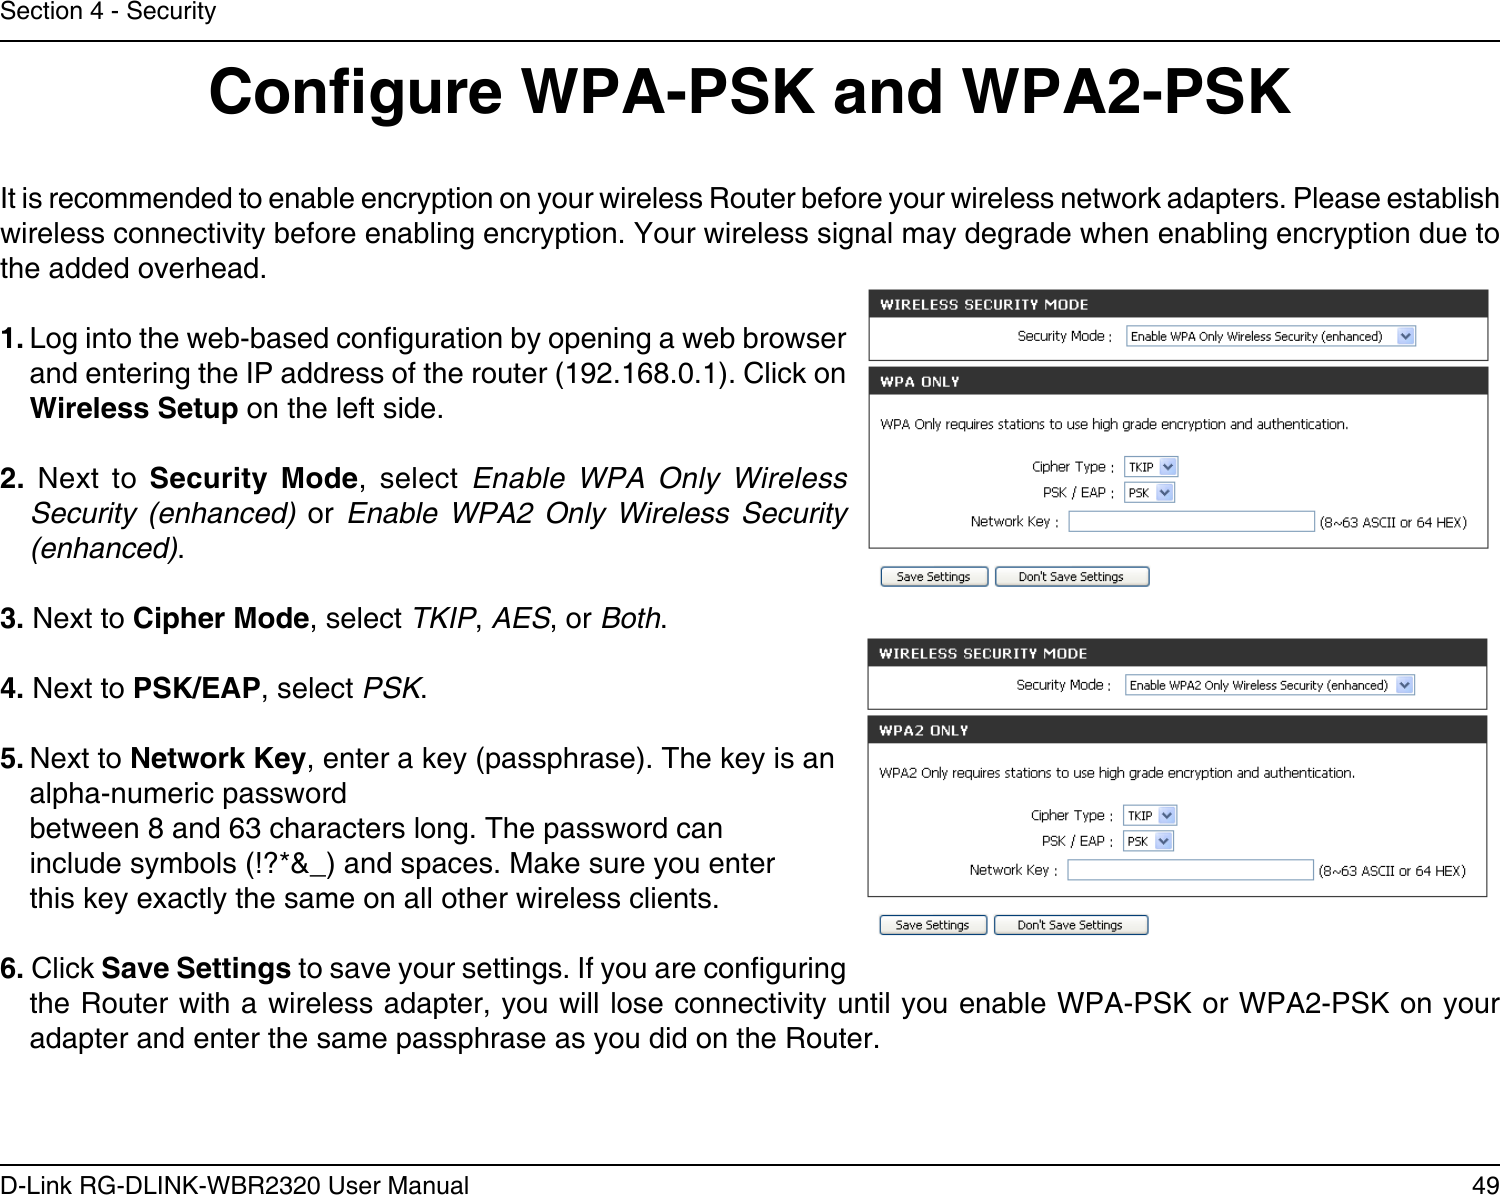 49D-Link RG-DLINK-WBR2320 User ManualSection 4 - SecurityCongure WPA-PSK and WPA2-PSKIt is recommended to enable encryption on your wireless Router before your wireless network adapters. Please establish wireless connectivity before enabling encryption. Your wireless signal may degrade when enabling encryption due to the added overhead.1. Log into the web-based conguration by opening a web browser and entering the IP address of the router (192.168.0.1). Click on Wireless Setup on the left side.2.  Next  to  Security  Mode,  select  Enable  WPA  Only  Wireless Security  (enhanced)  or  Enable  WPA2  Only  Wireless  Security (enhanced).3. Next to Cipher Mode, select TKIP, AES, or Both.4. Next to PSK/EAP, select PSK.5. Next to Network Key, enter a key (passphrase). The key is an alpha-numeric password between 8 and 63 characters long. The password can include symbols (!?*&amp;_) and spaces. Make sure you enter this key exactly the same on all other wireless clients.6. Click Save Settings to save your settings. If you are conguring the Router with a wireless adapter, you will lose connectivity until you enable WPA-PSK or WPA2-PSK on your adapter and enter the same passphrase as you did on the Router.